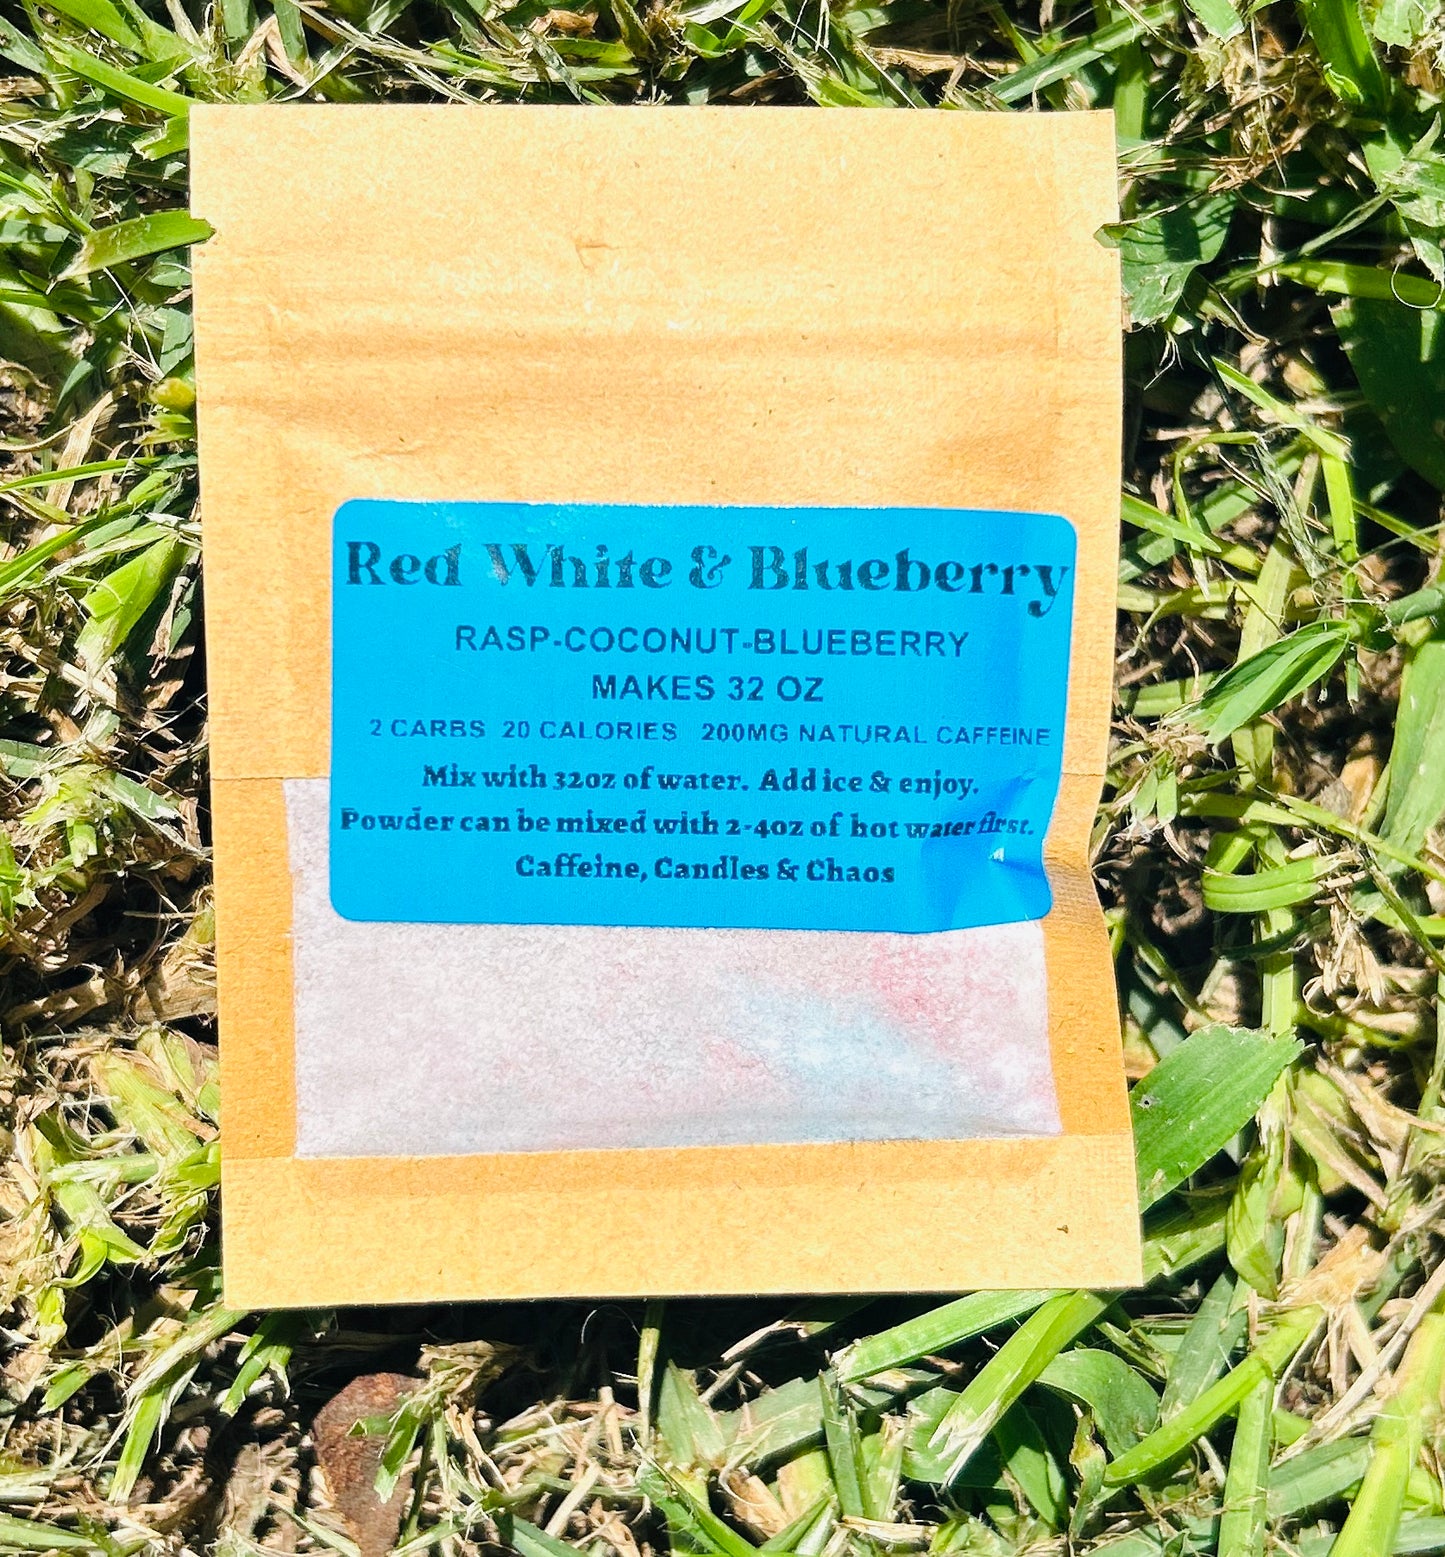 Red White & Blueberry loaded Tea